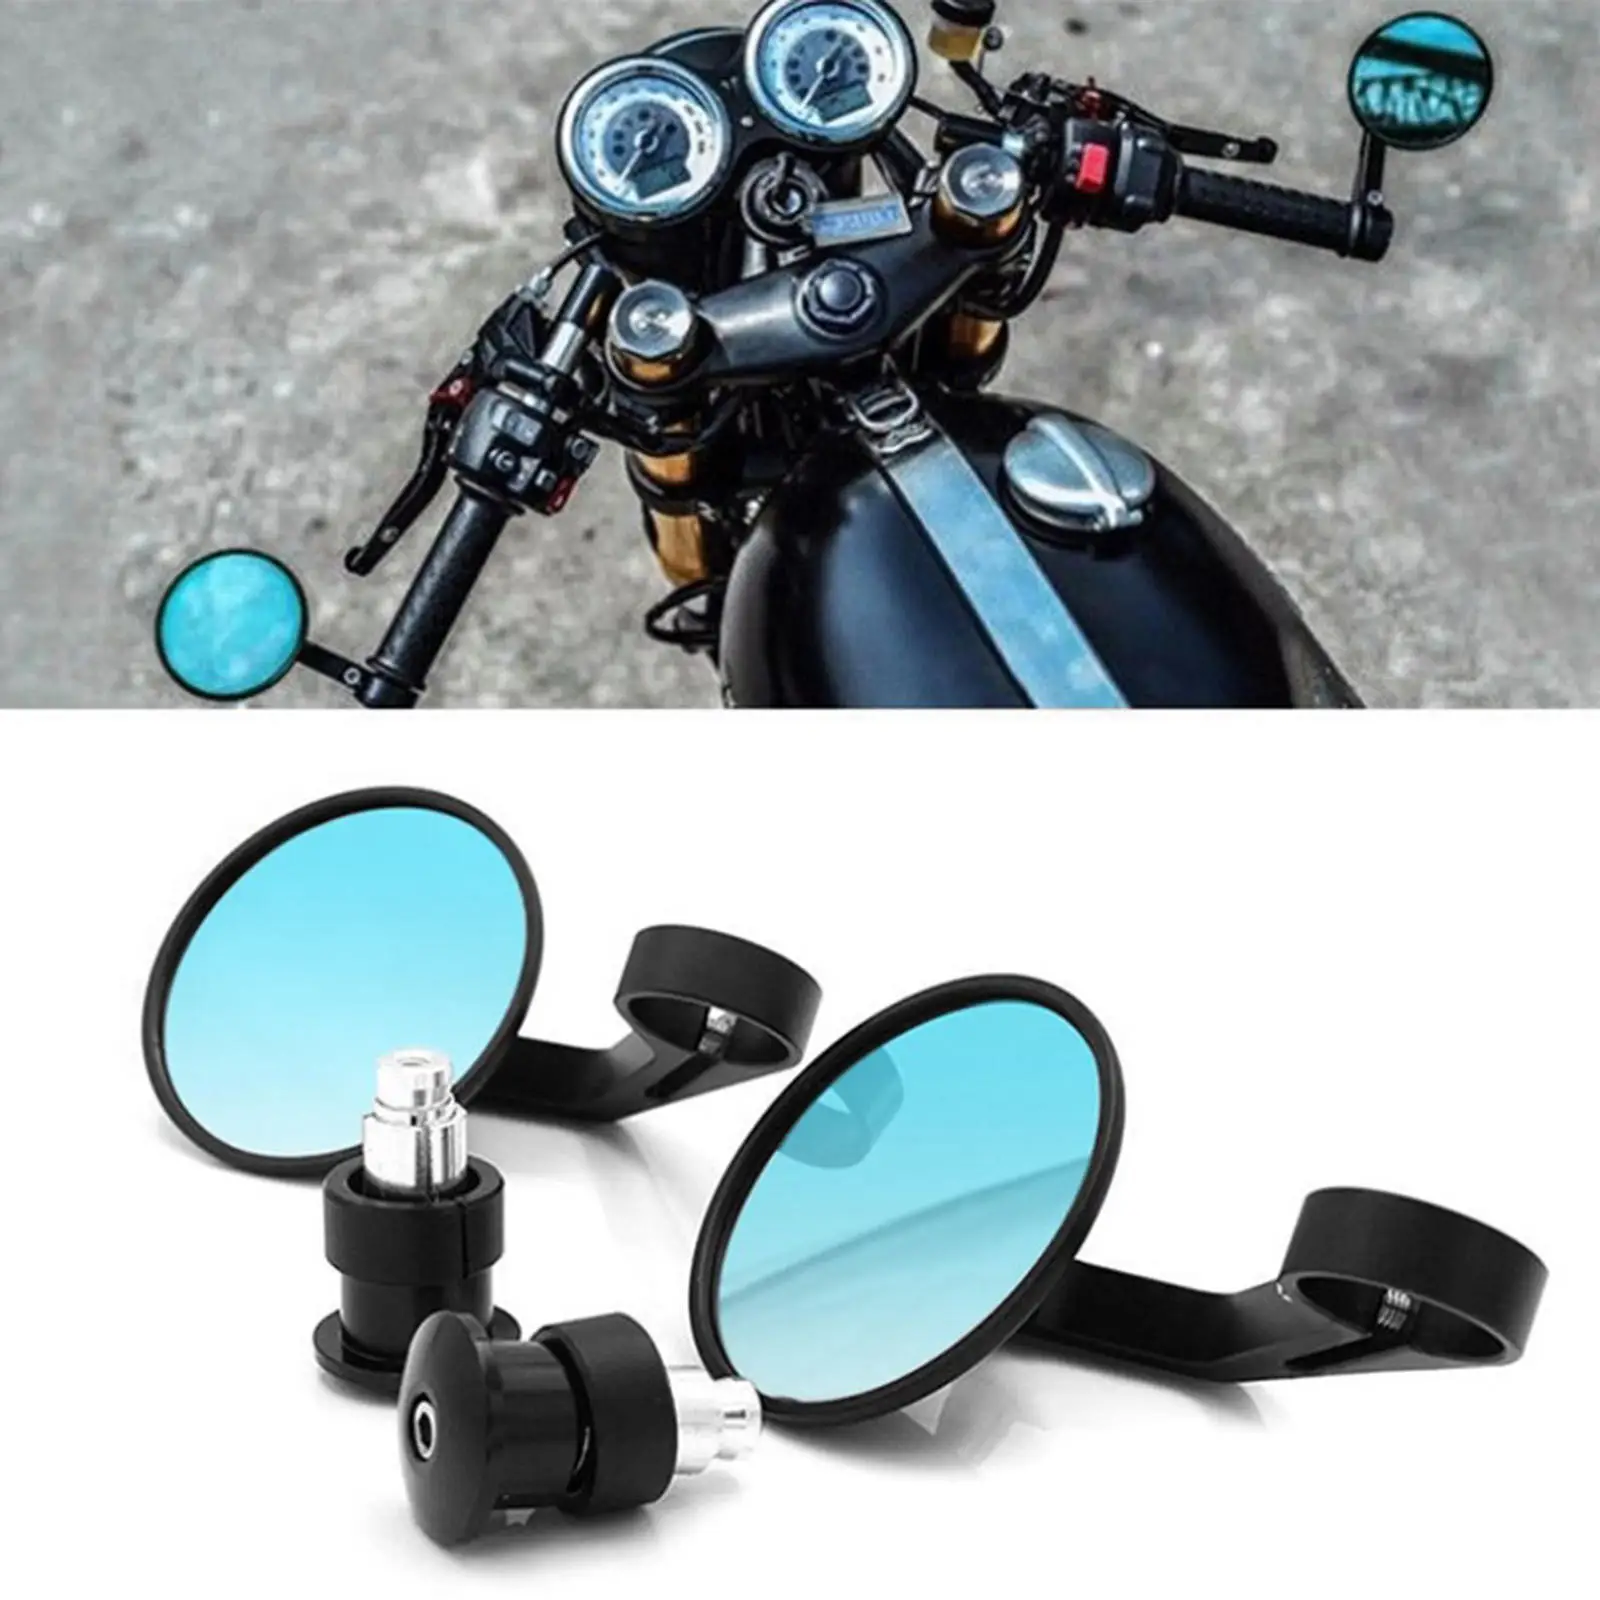 1 Pair Motorcycle Rear View Mirrors Aluminum Alloy Universal fits for Most Motocycle